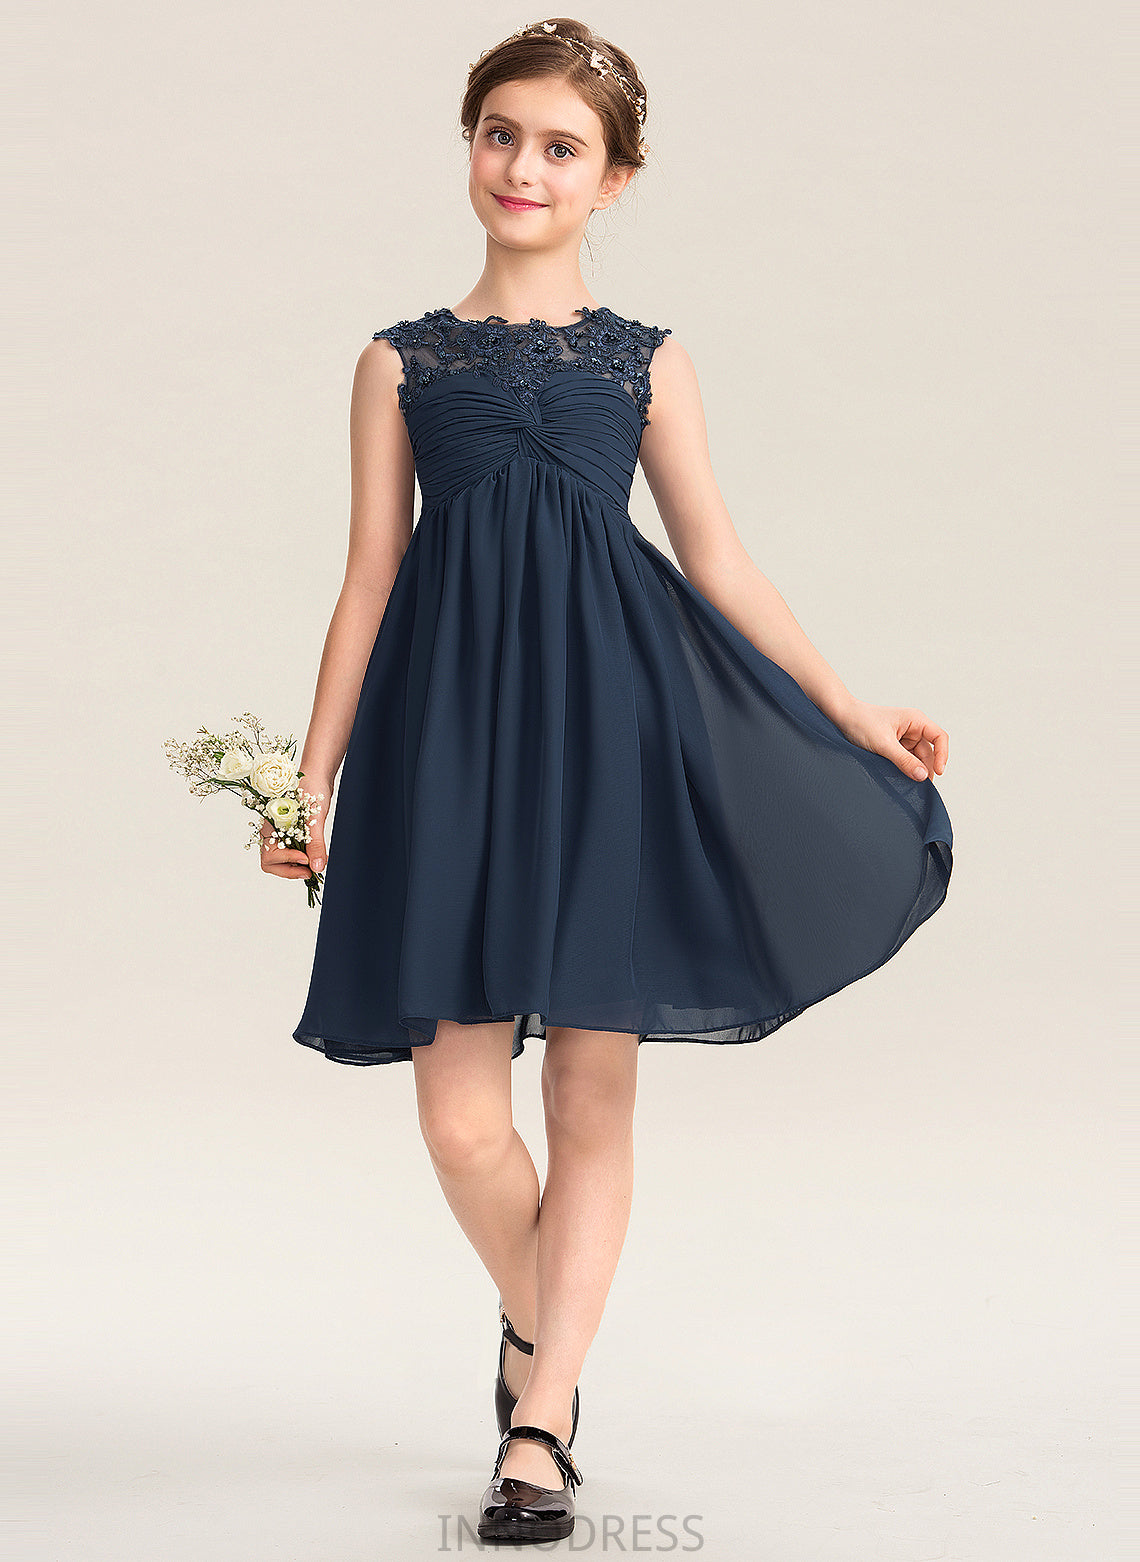 Neck Scoop Sequins Beading Ruffle Joslyn Junior Bridesmaid Dresses Lace With Empire Knee-Length Chiffon